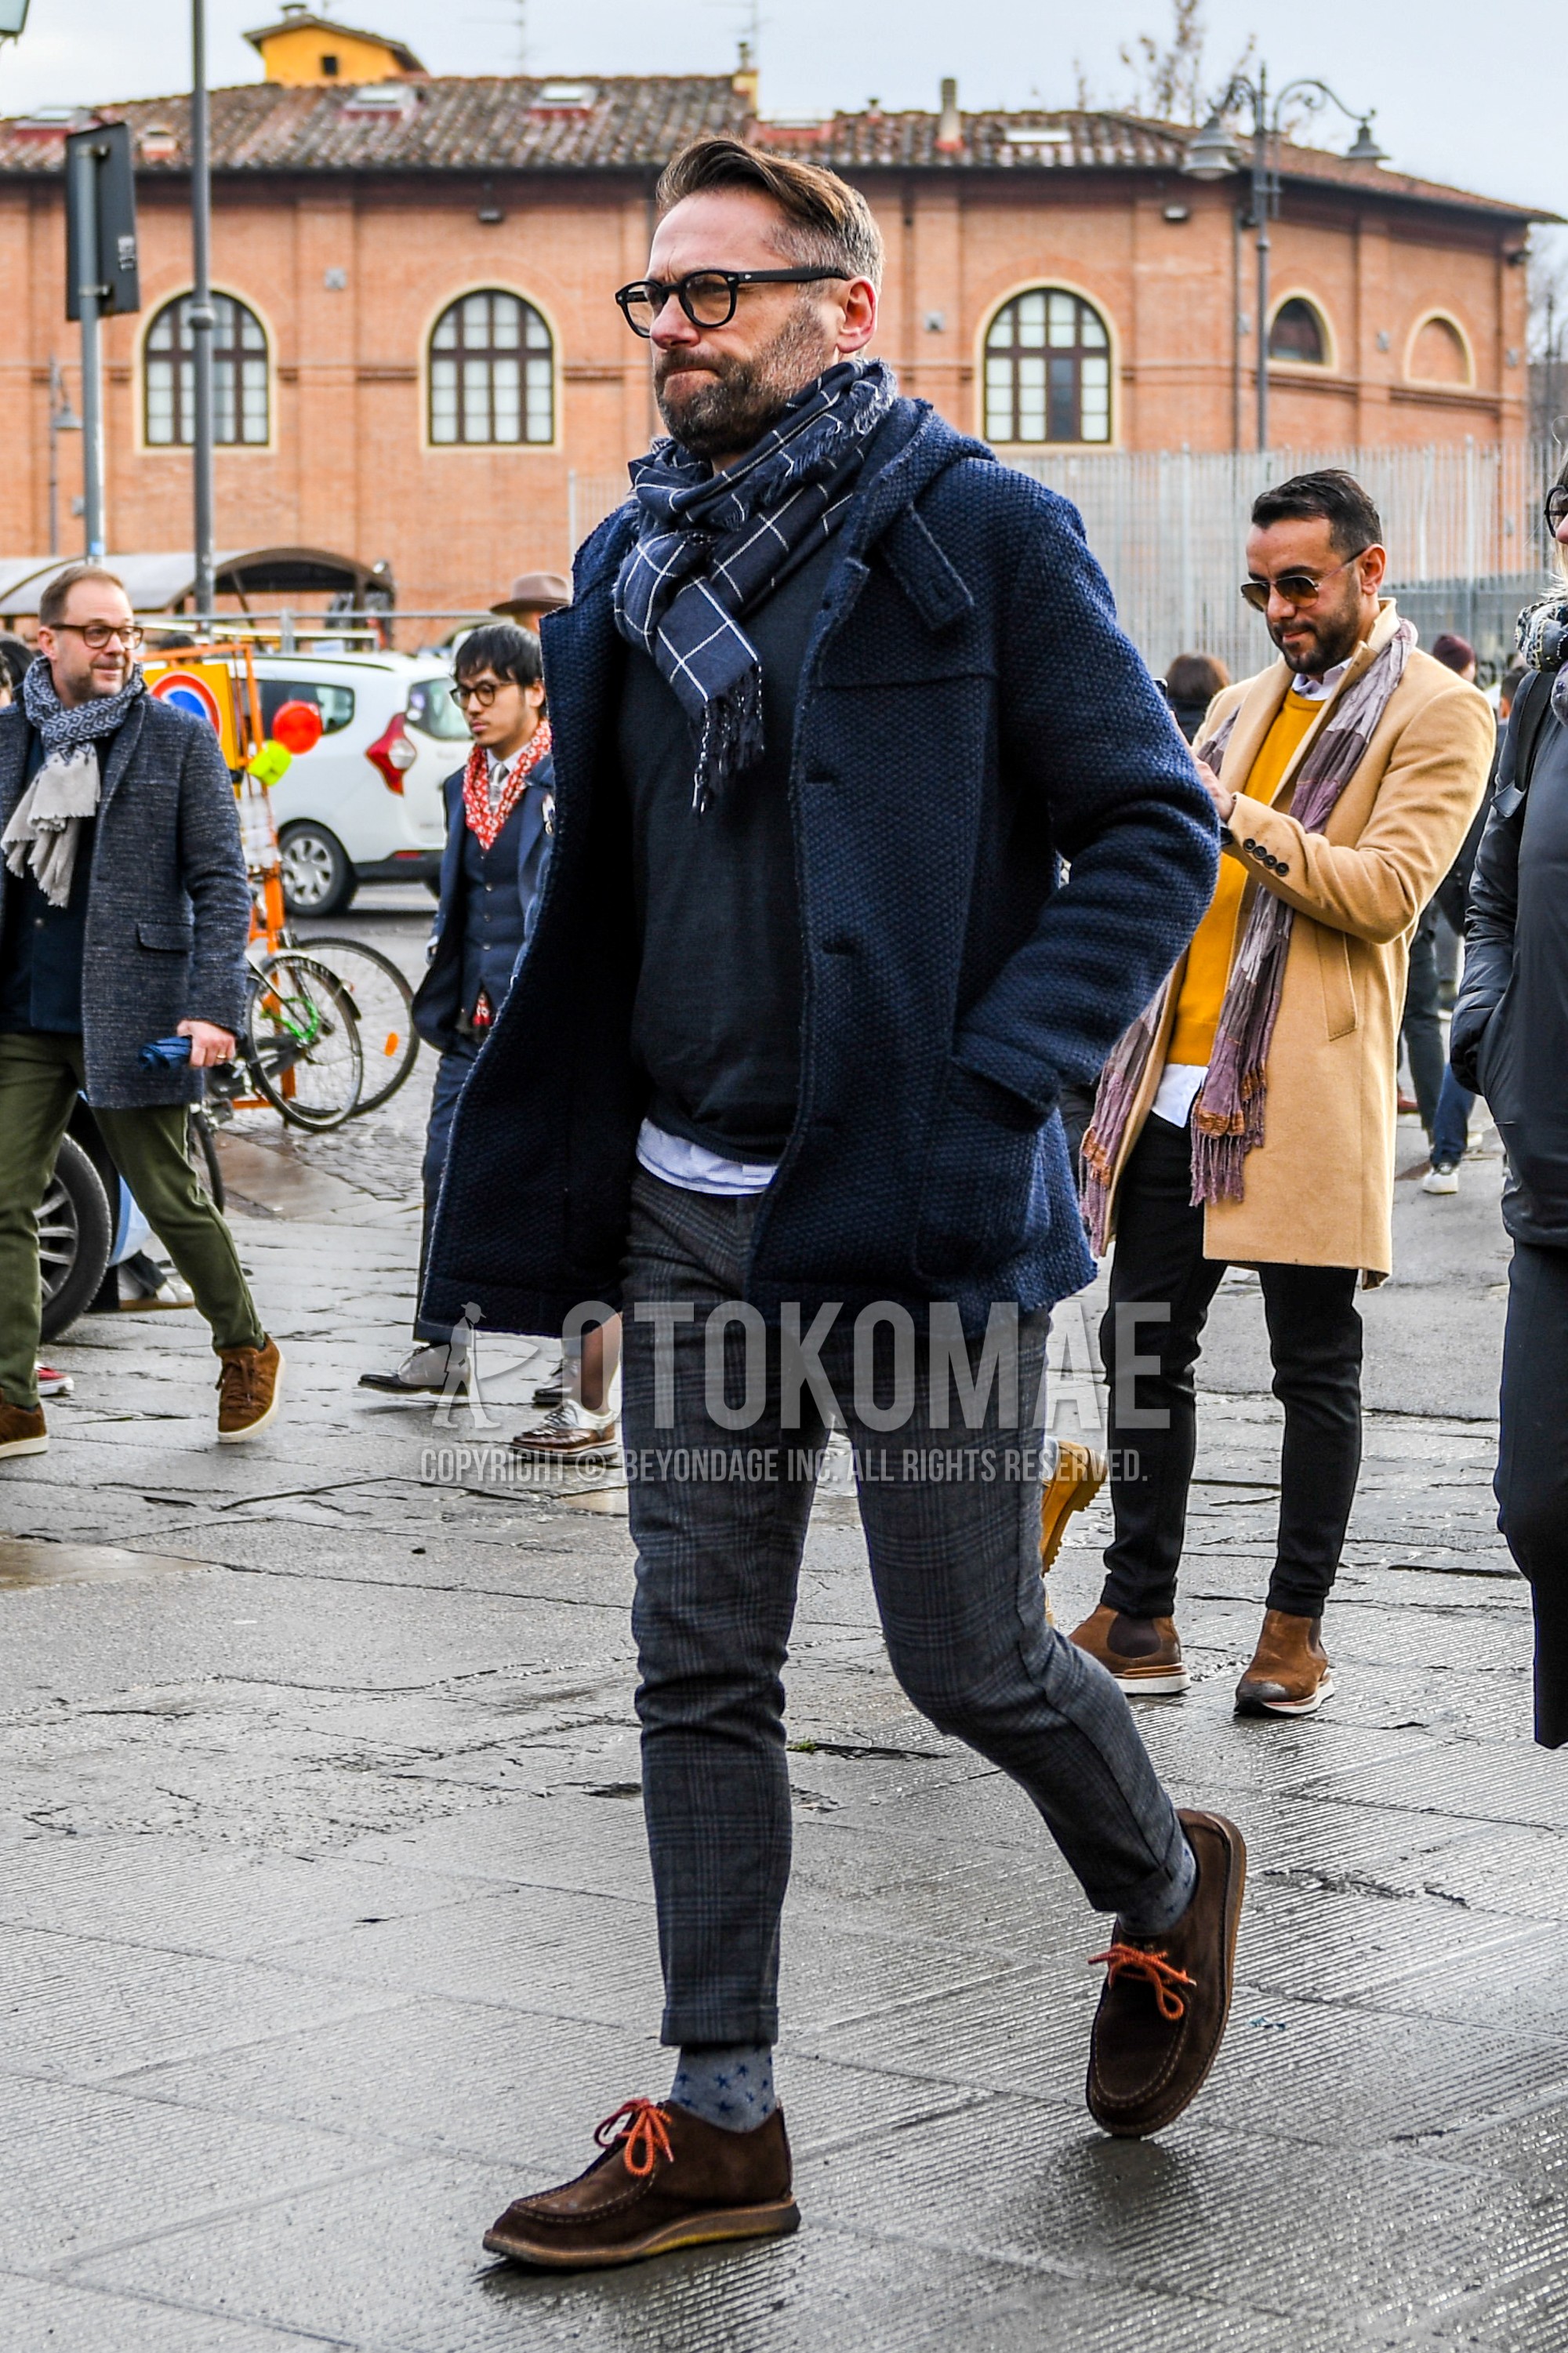 Men's autumn winter outfit with plain glasses, navy check scarf, navy outerwear hooded coat, gray plain sweater, gray check slacks, gray socks socks, brown  boots, suede shoes leather shoes.